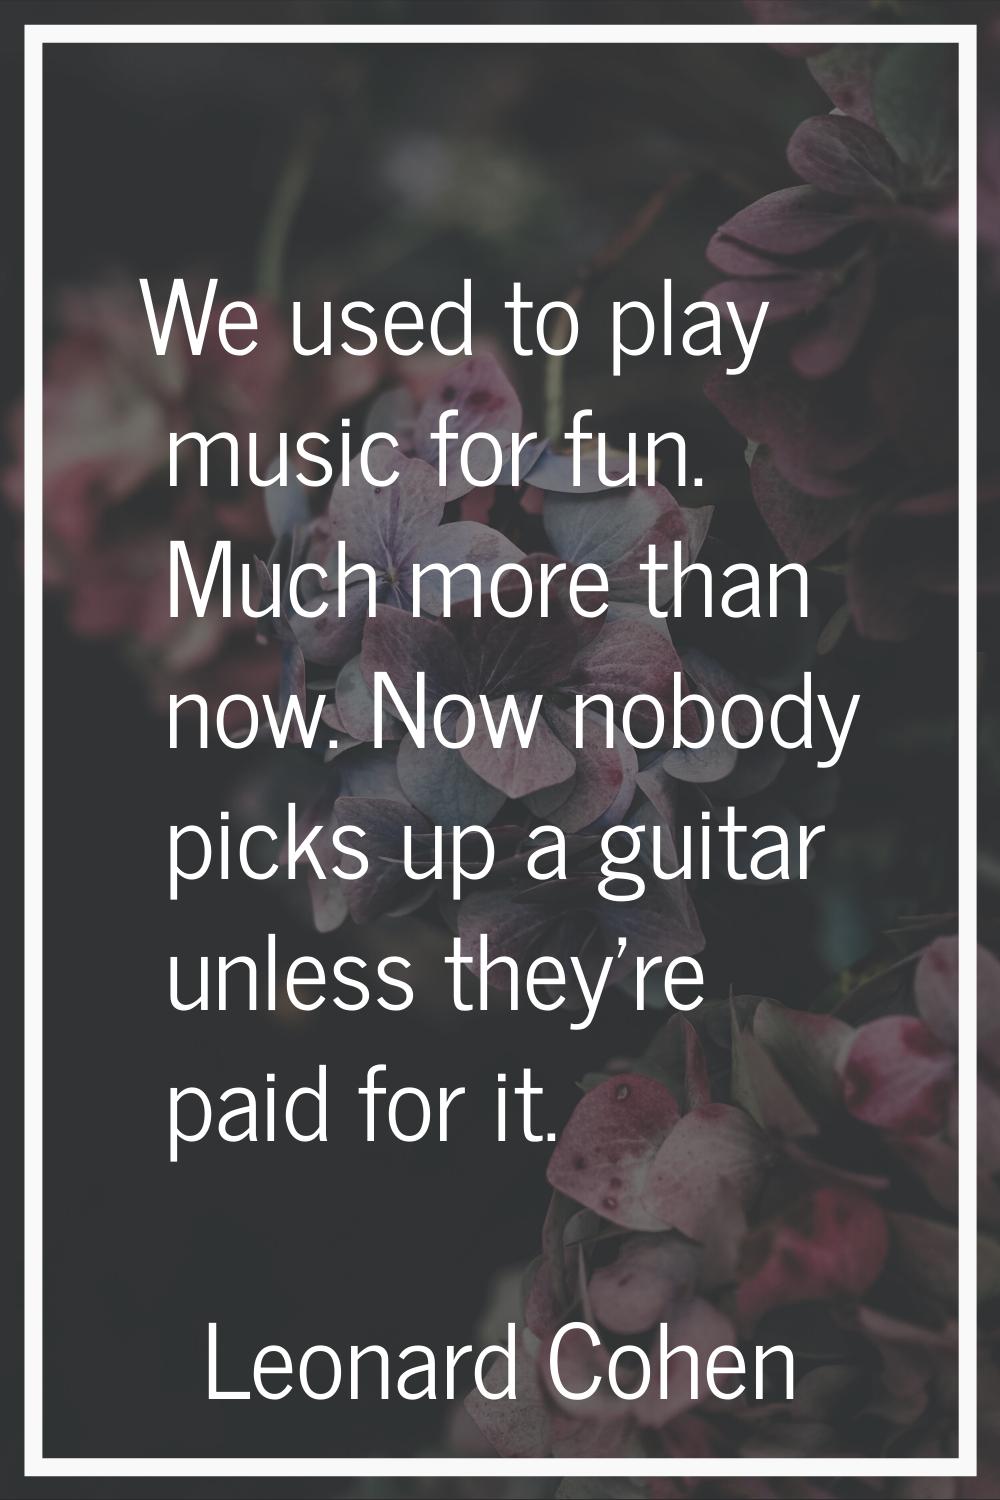 We used to play music for fun. Much more than now. Now nobody picks up a guitar unless they're paid